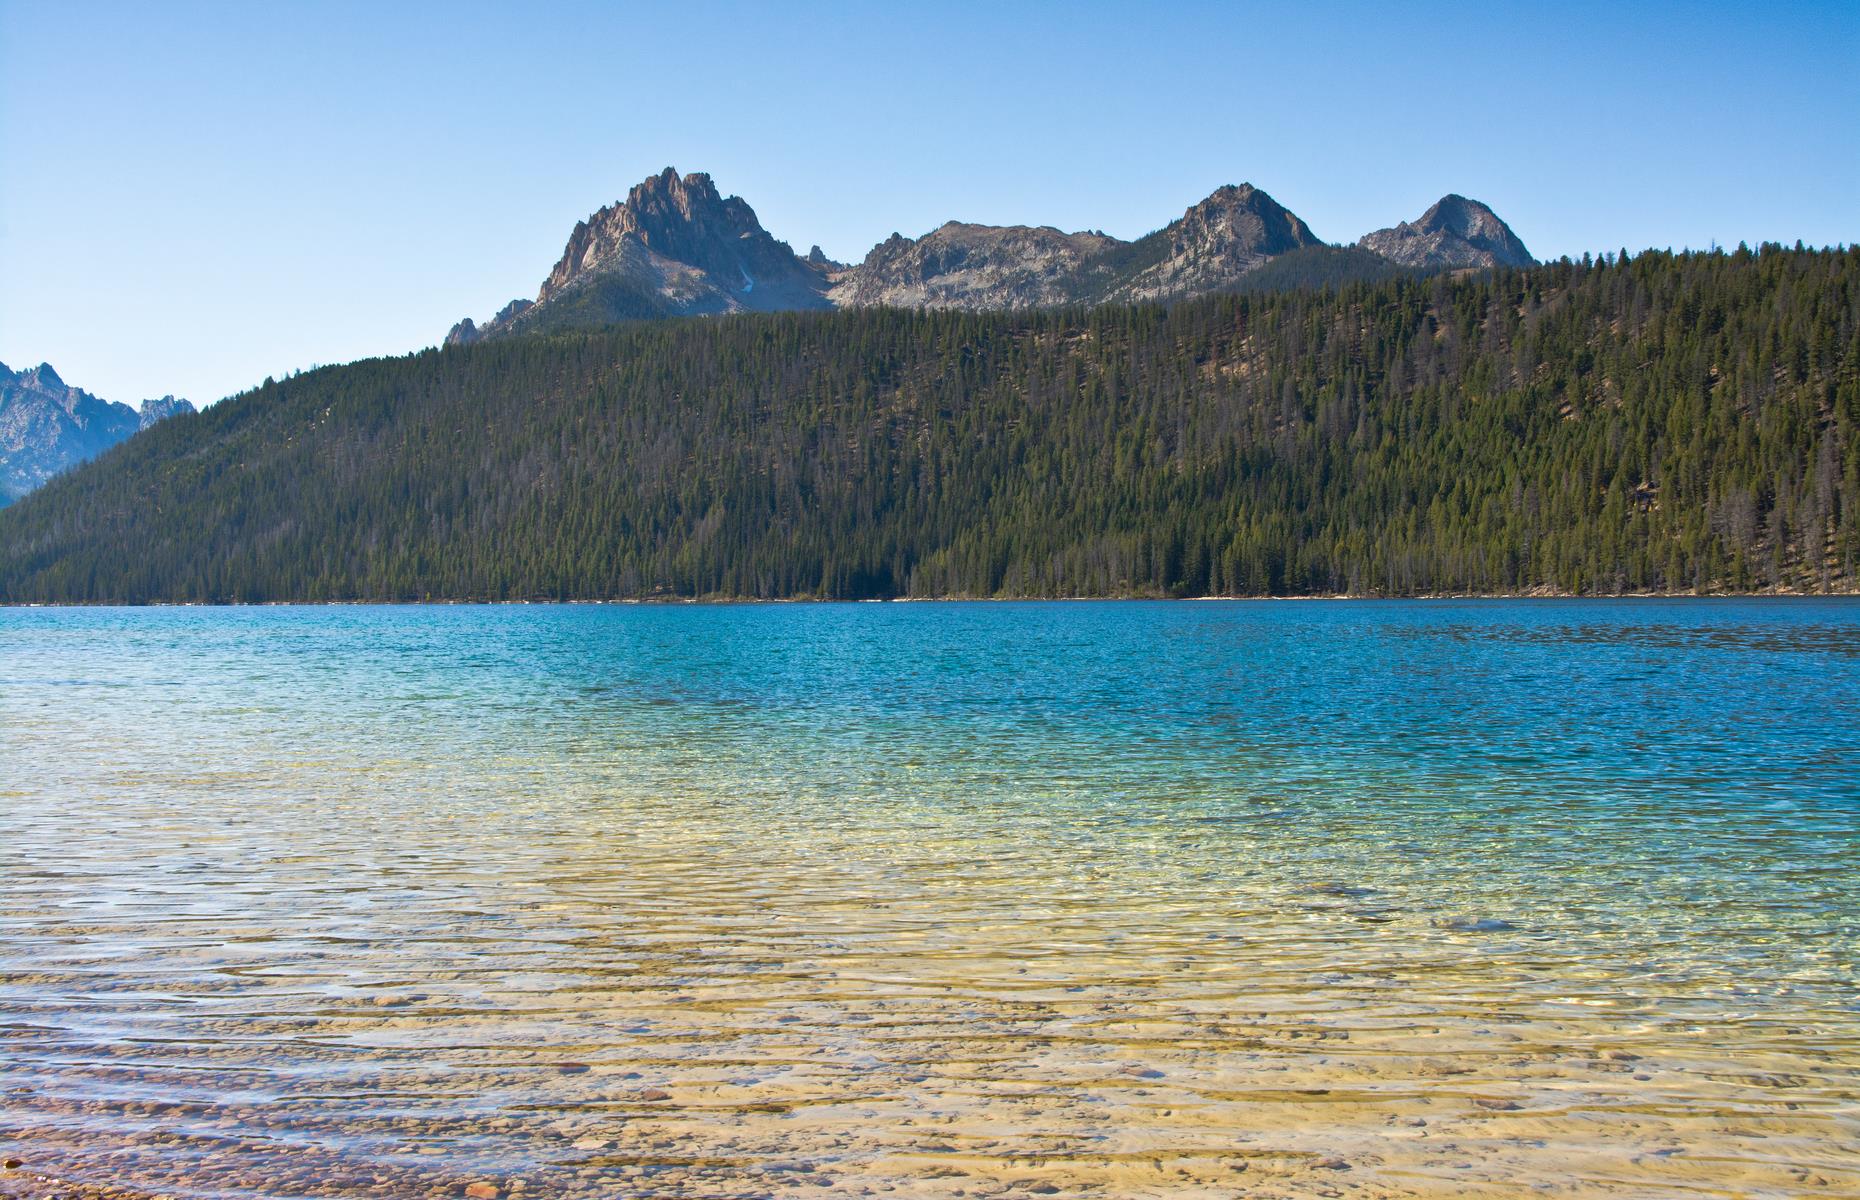 <p>Staying overnight on the shore of <a href="https://www.fs.usda.gov/recarea/sawtooth/recreation/camping-cabins/recarea/?recid=5919&actid=31">Redfish Lake</a>, in Idaho’s Sawtooth National Forest, is pretty much as good as it gets. The RV sites here are steps from the water, which stretches out from a smooth pebble beach. It’s perfect for paddling, swimming and kayaking, with the peaks of the Sawtooth Mountains peeping behind thick pine forest.</p>